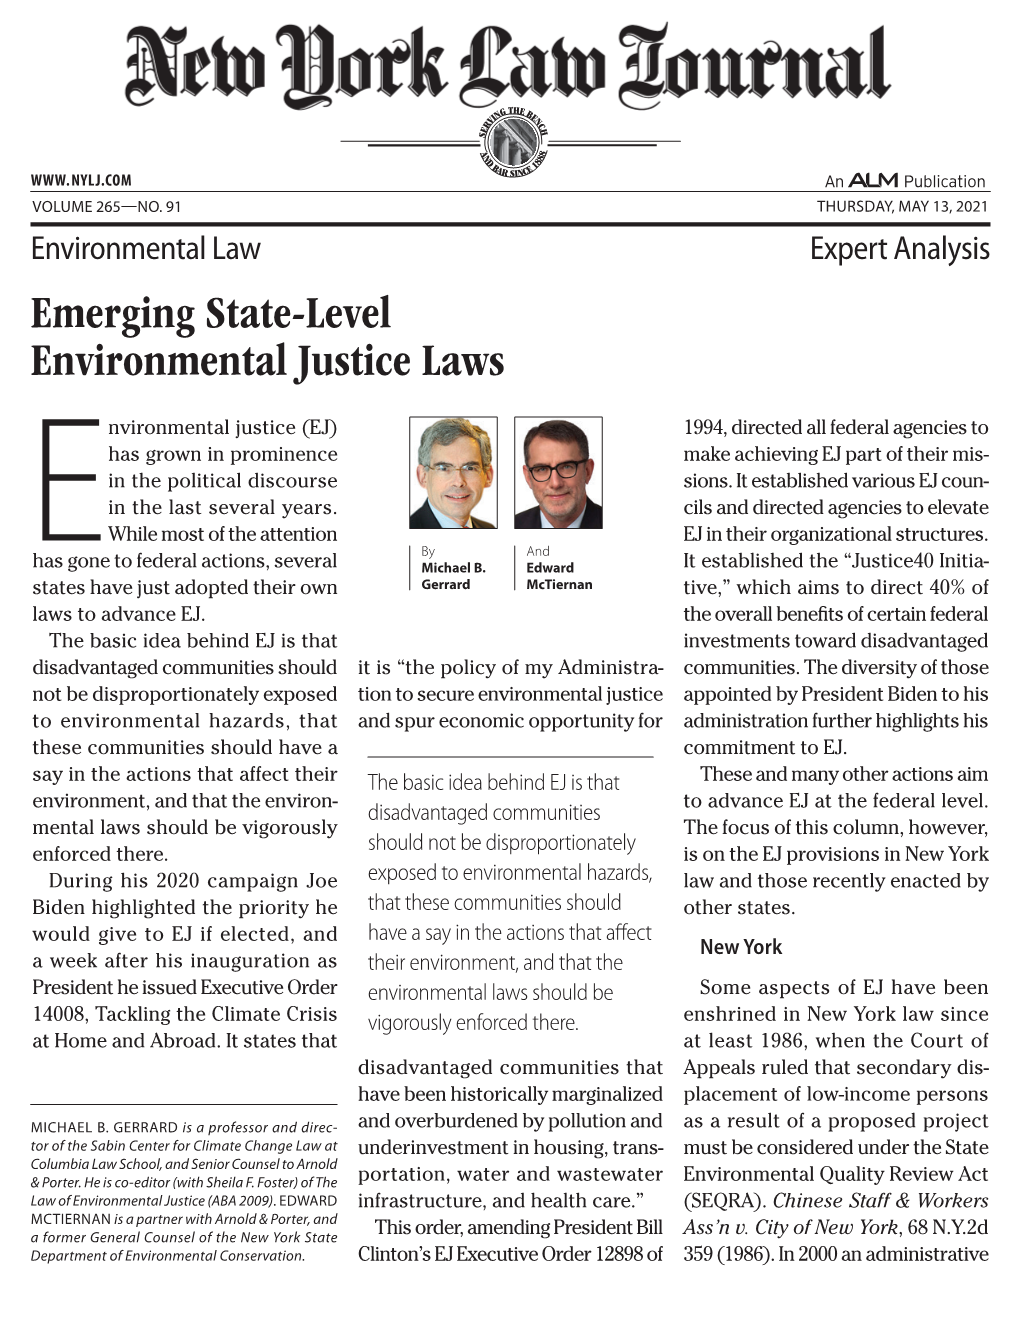 Emerging State-Level Environmental Justice Laws